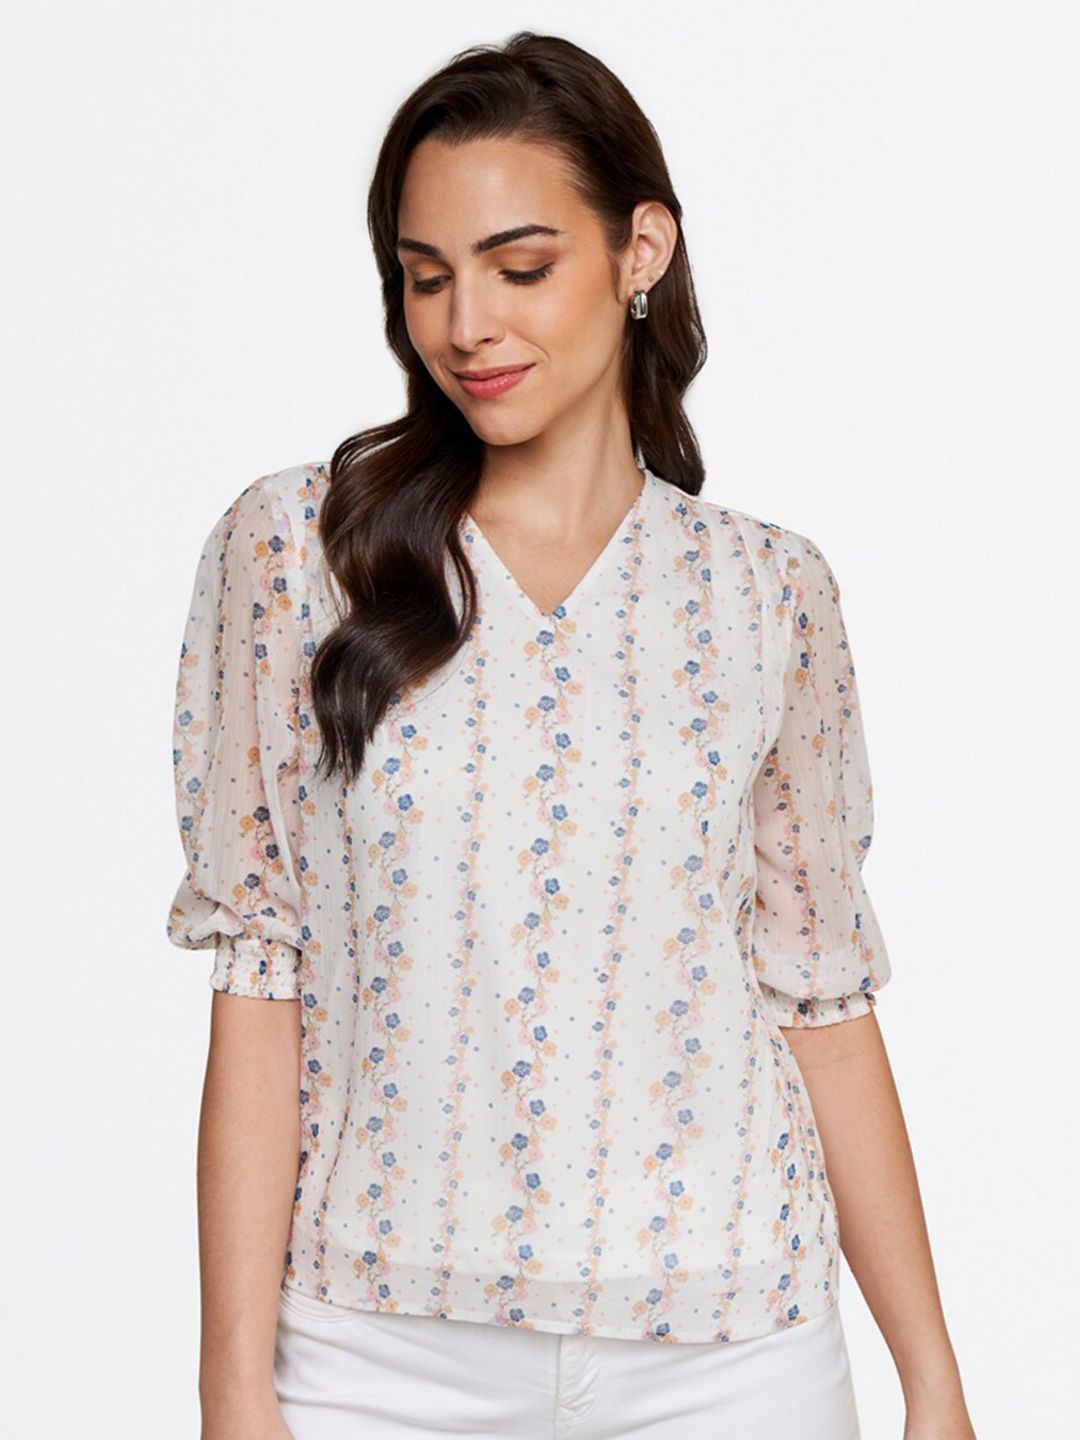 AND White & Peach-Coloured Floral Print Top Price in India